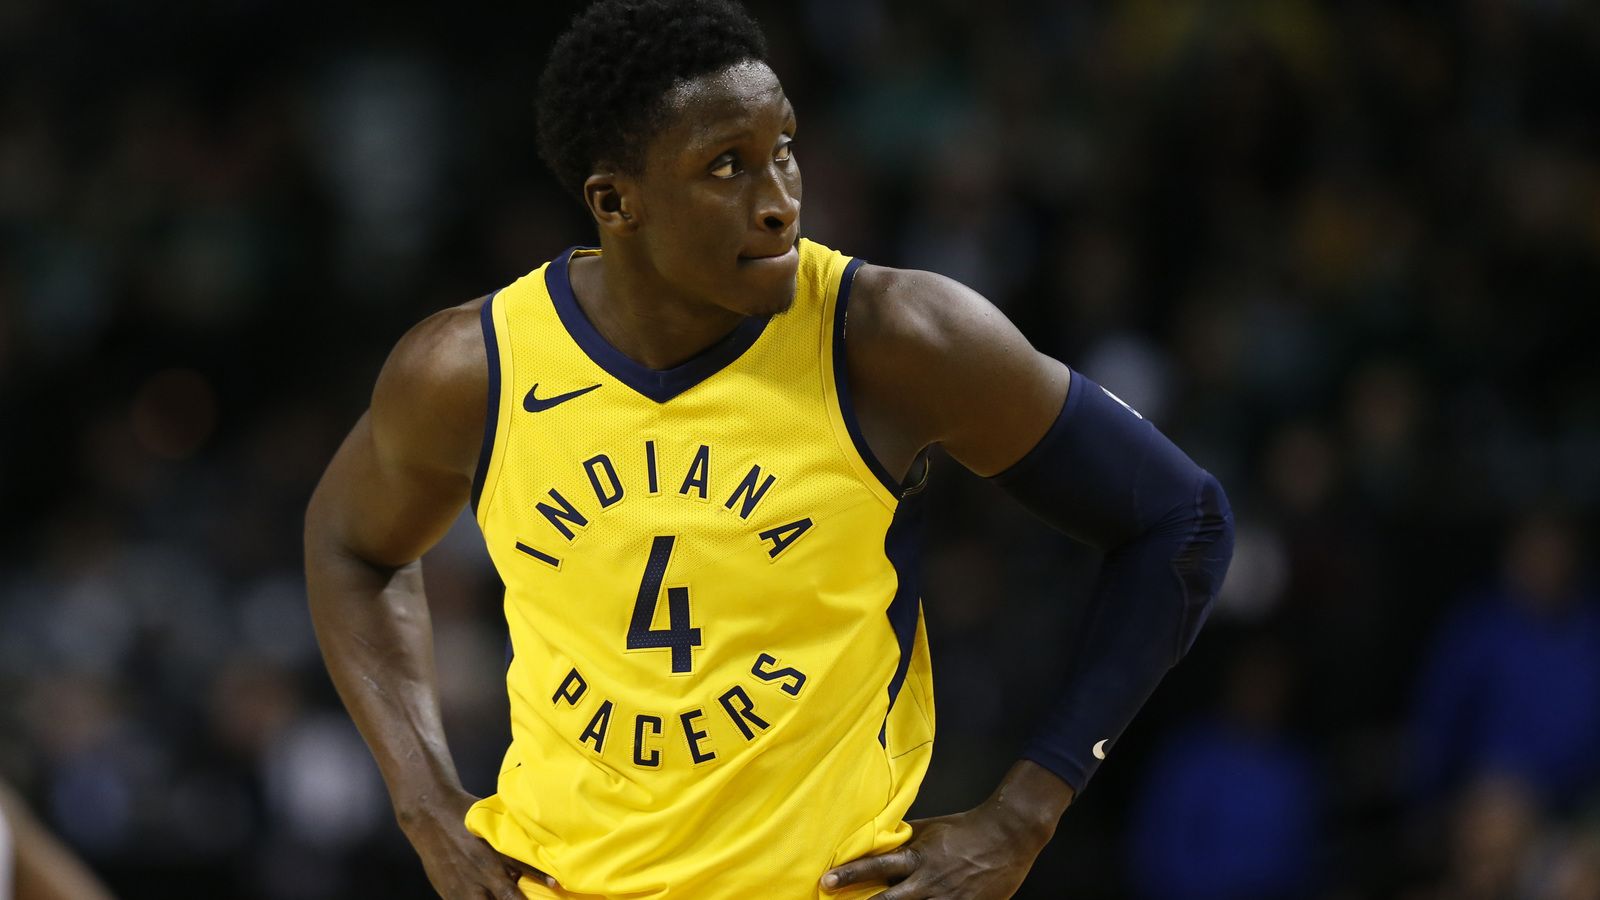 Victor Oladipo Gets Assist From Chadwick Boseman On